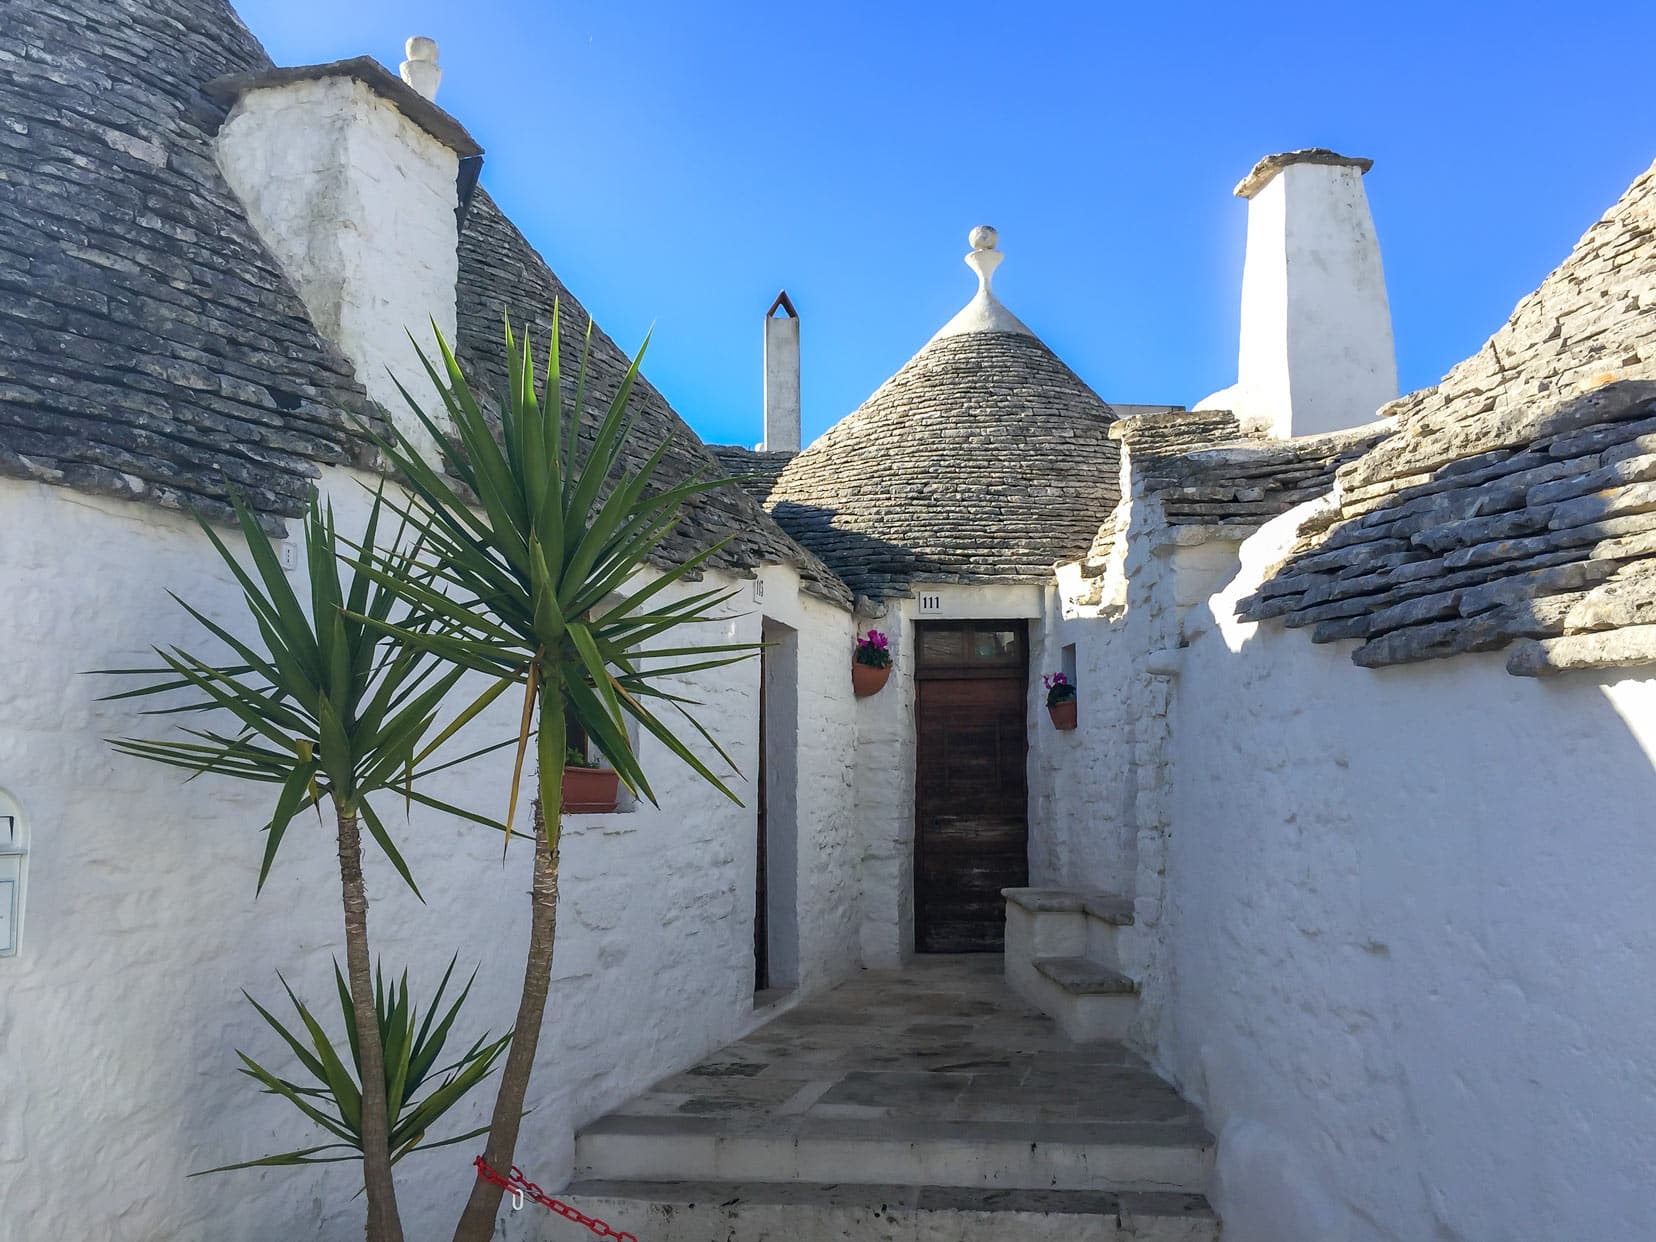 Small entrance way to an Alberobello house with a palm plant in the foreground